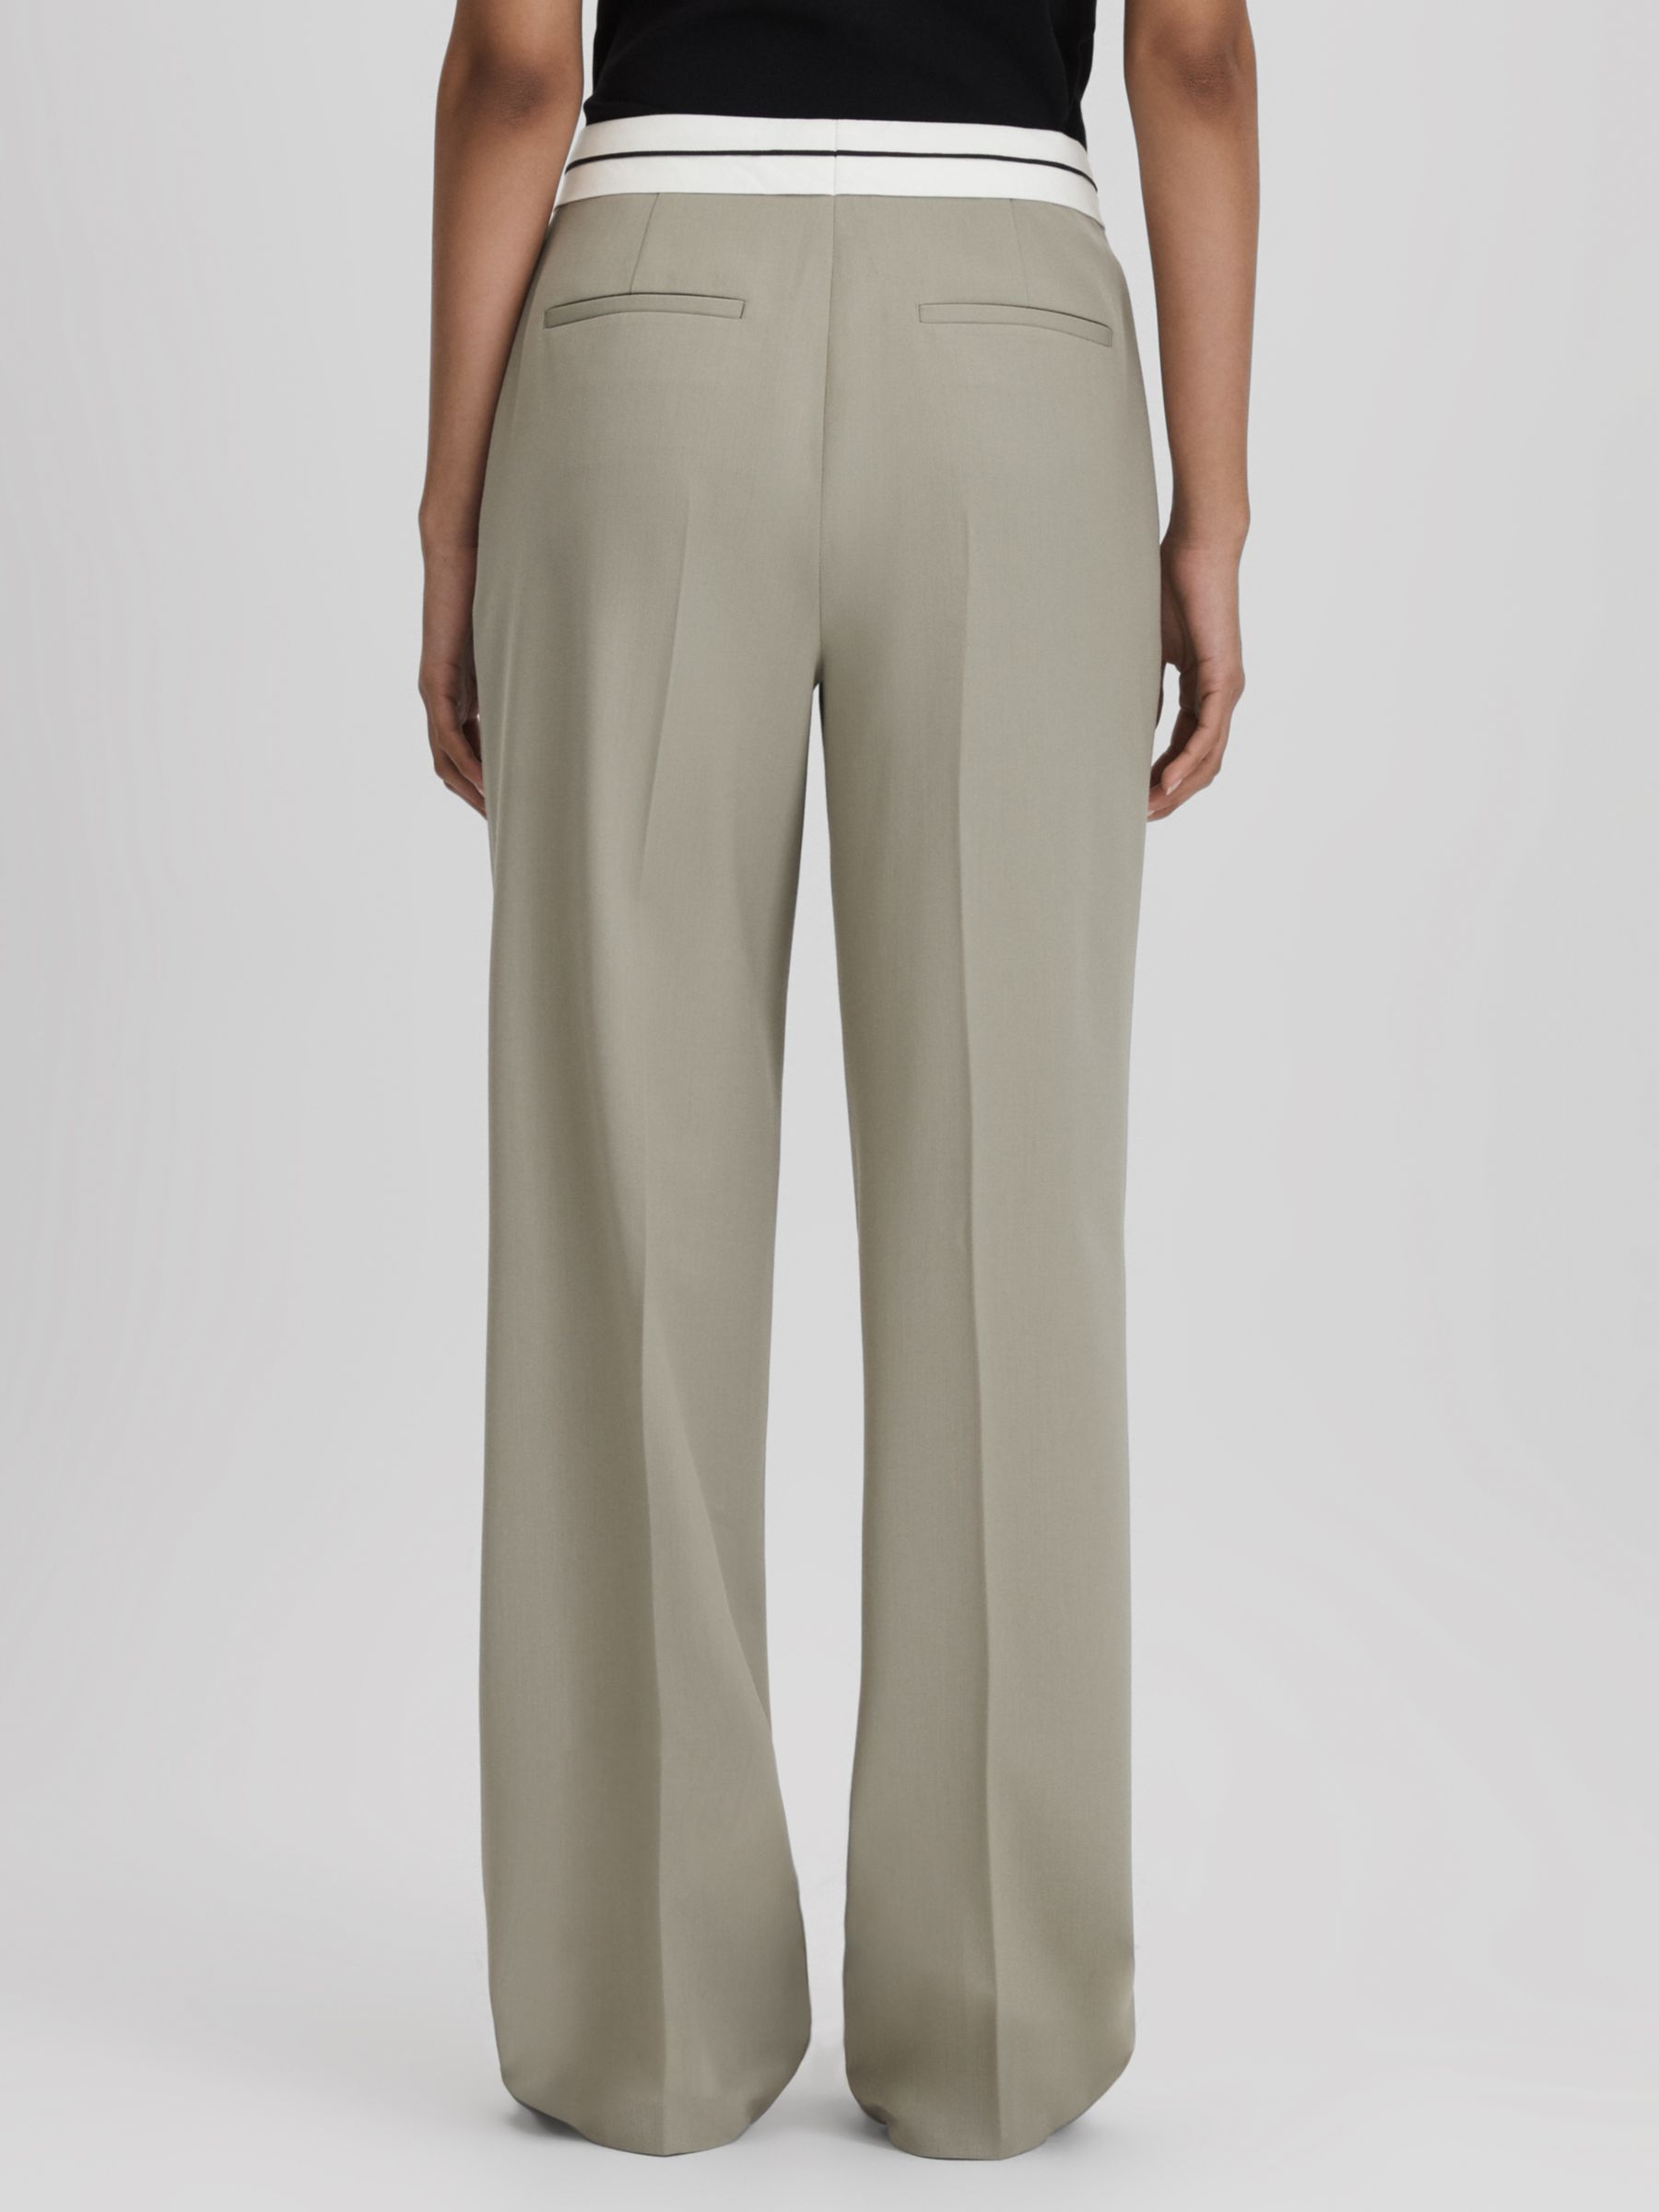 Buy Reiss Whitley Wool Blend Wide Leg Trousers, Green Online at johnlewis.com